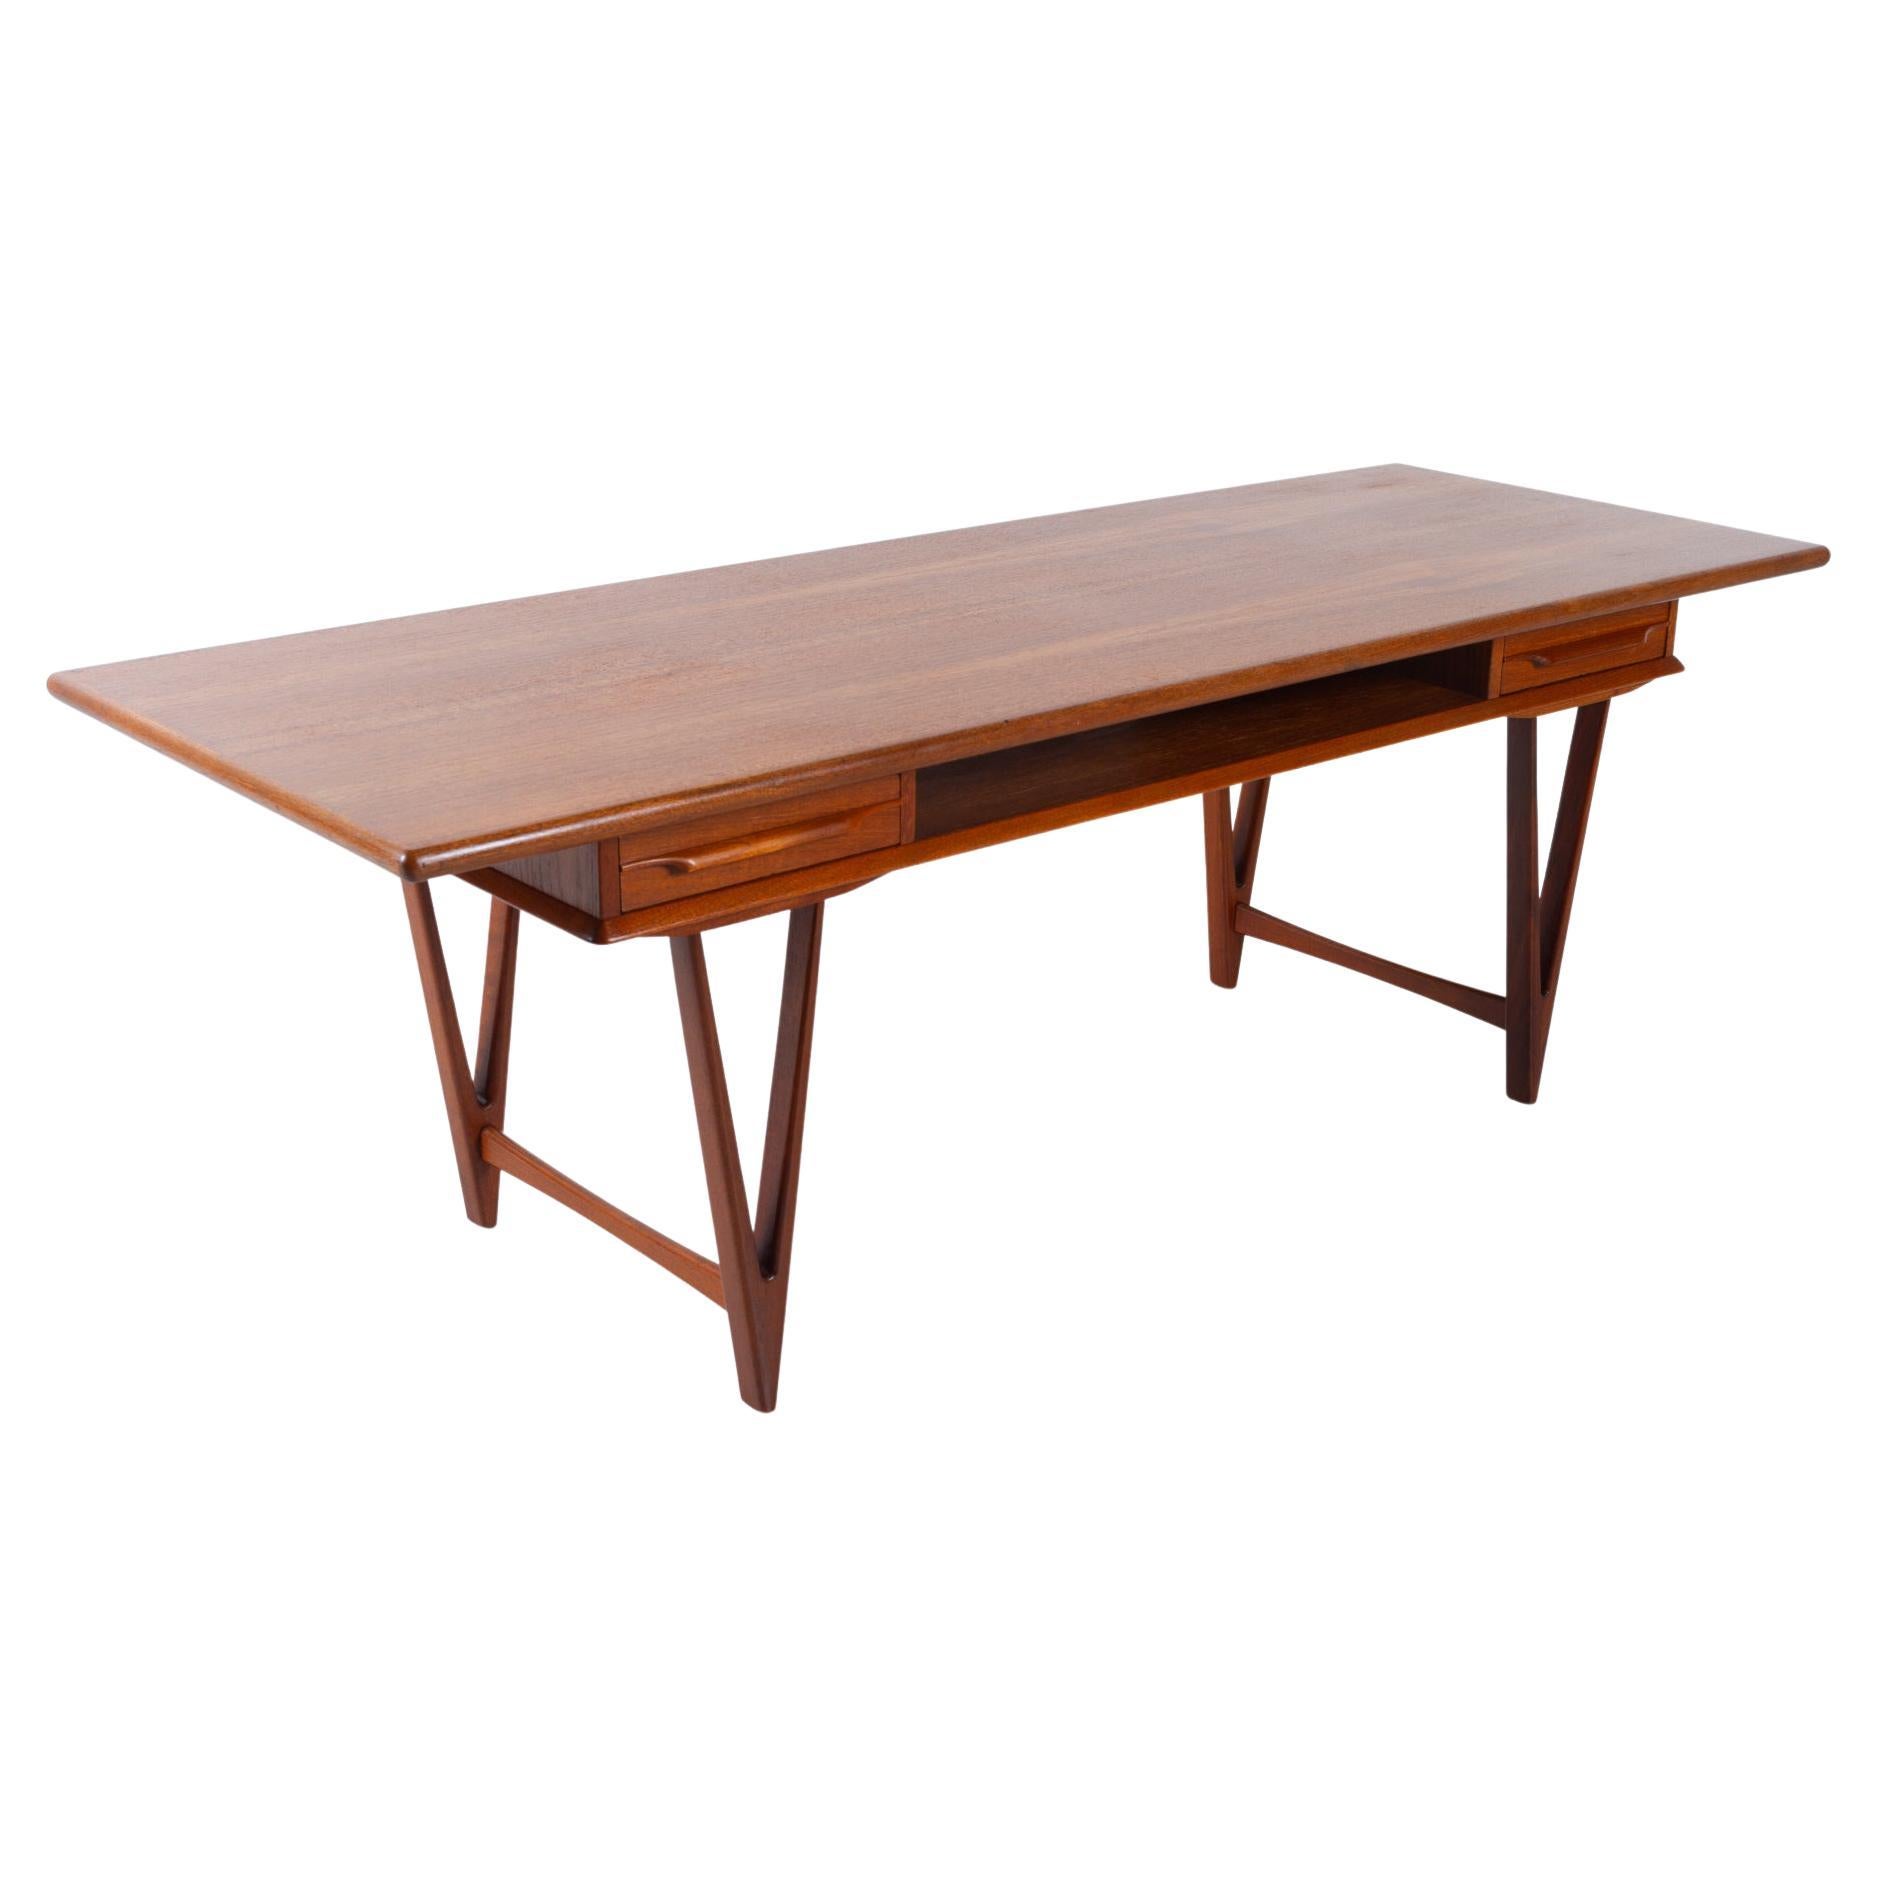 Vintage Danish Teak Coffee Table by E.W. Bach 1960s For Sale